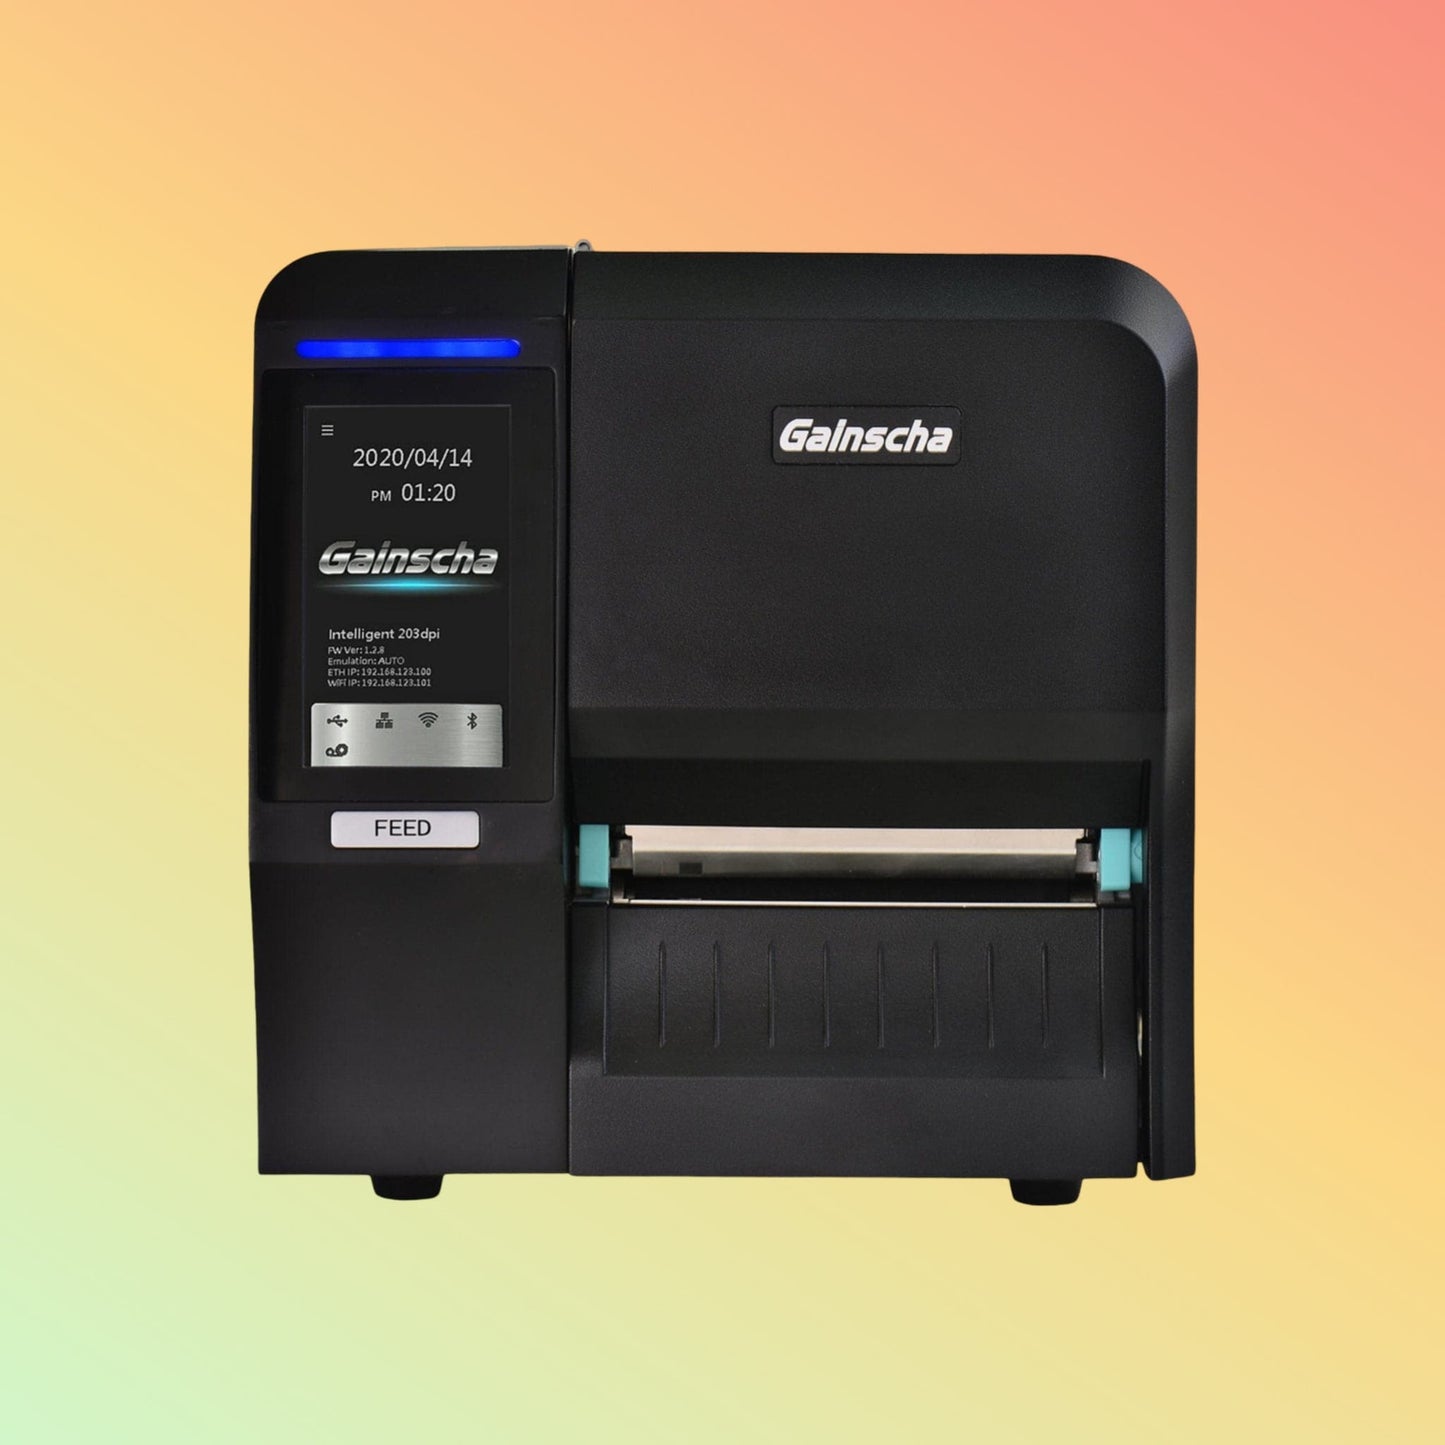 "High-performance Gainscha GI-2408T, built for industrial productivity with advanced printing technology and robust materials."